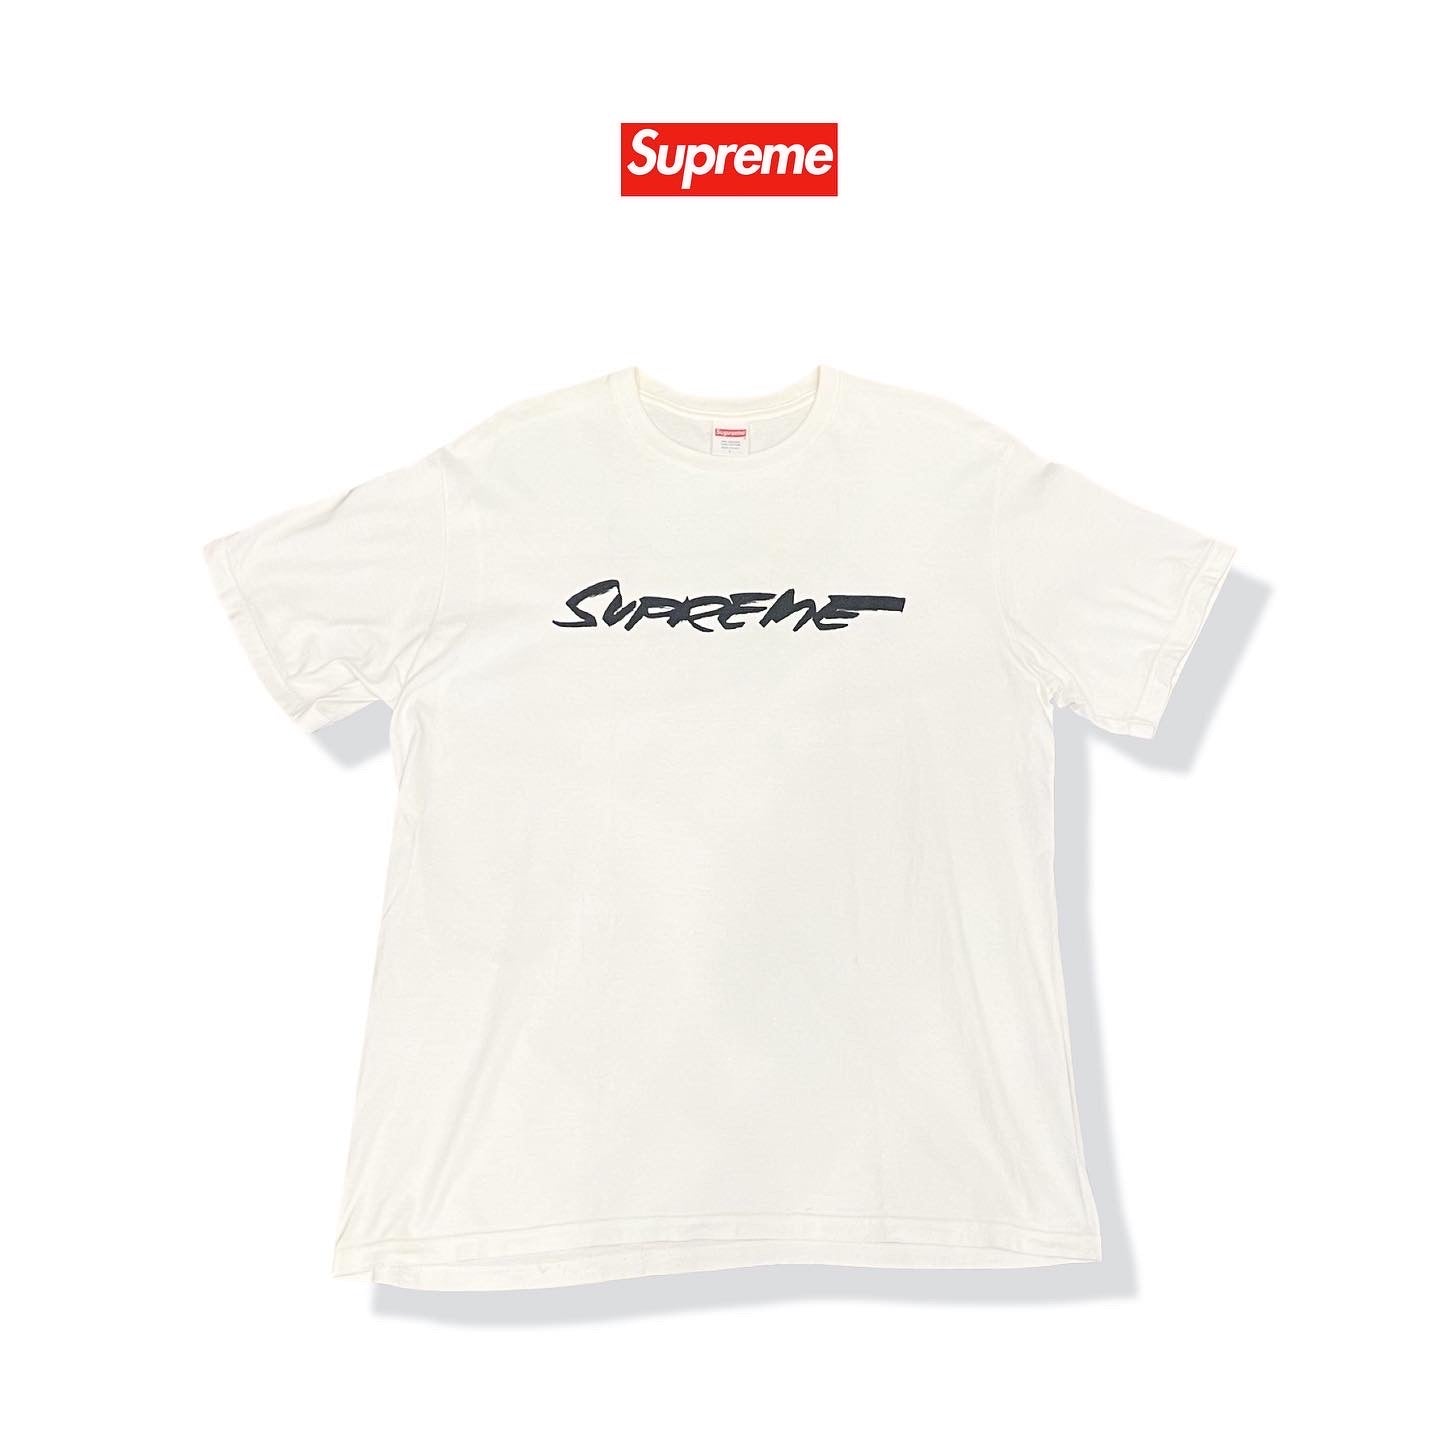 Supreme T shirts – Sold Out